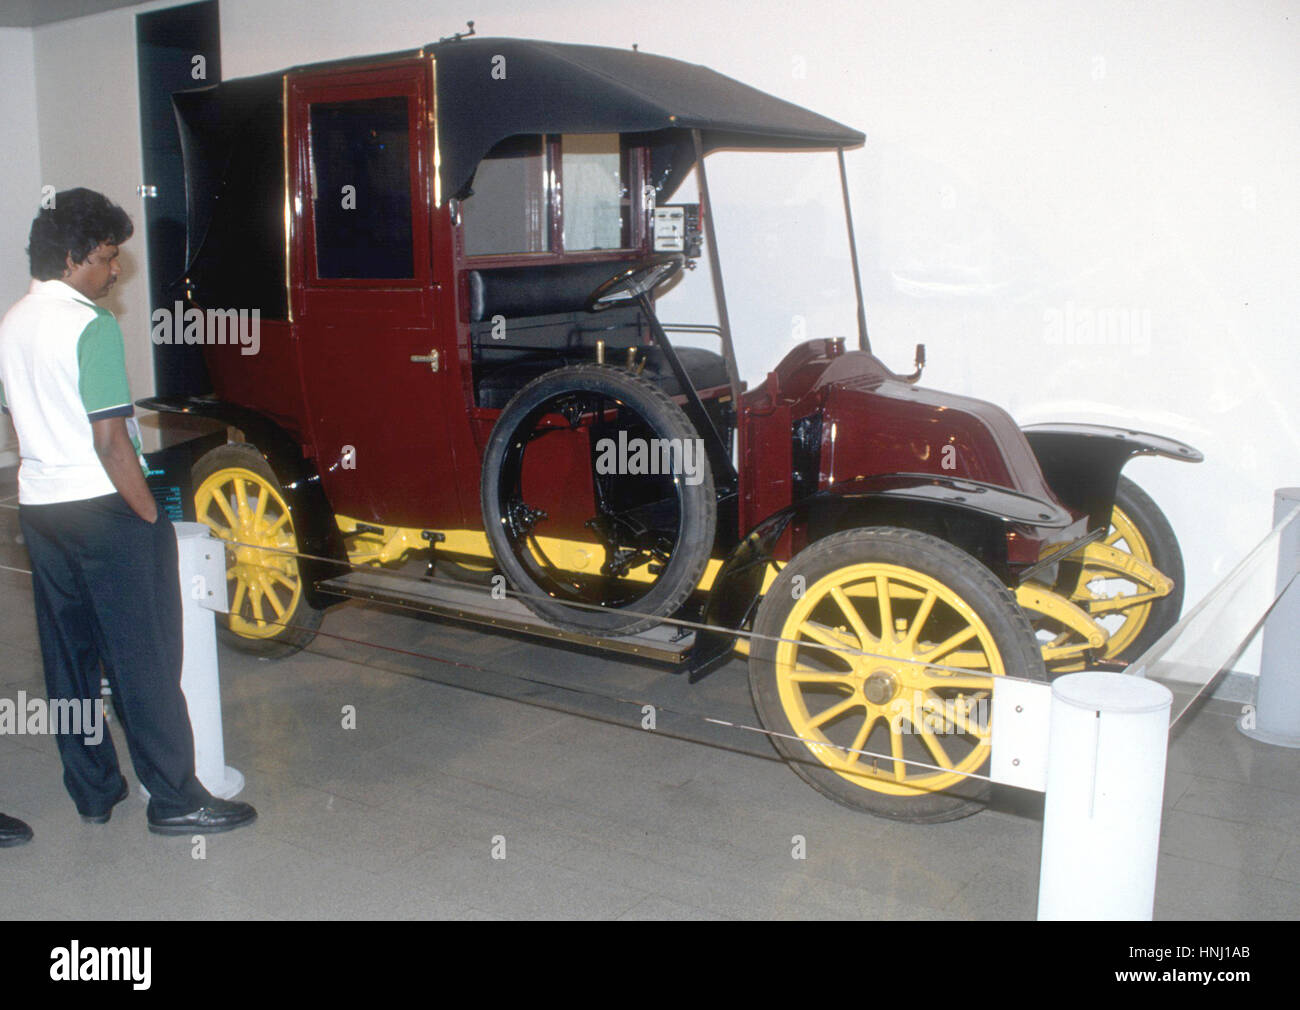 RENAULT Taxi 1910 on Temporary Exhibition with old cars in Stockholm 2000 Stock Photo